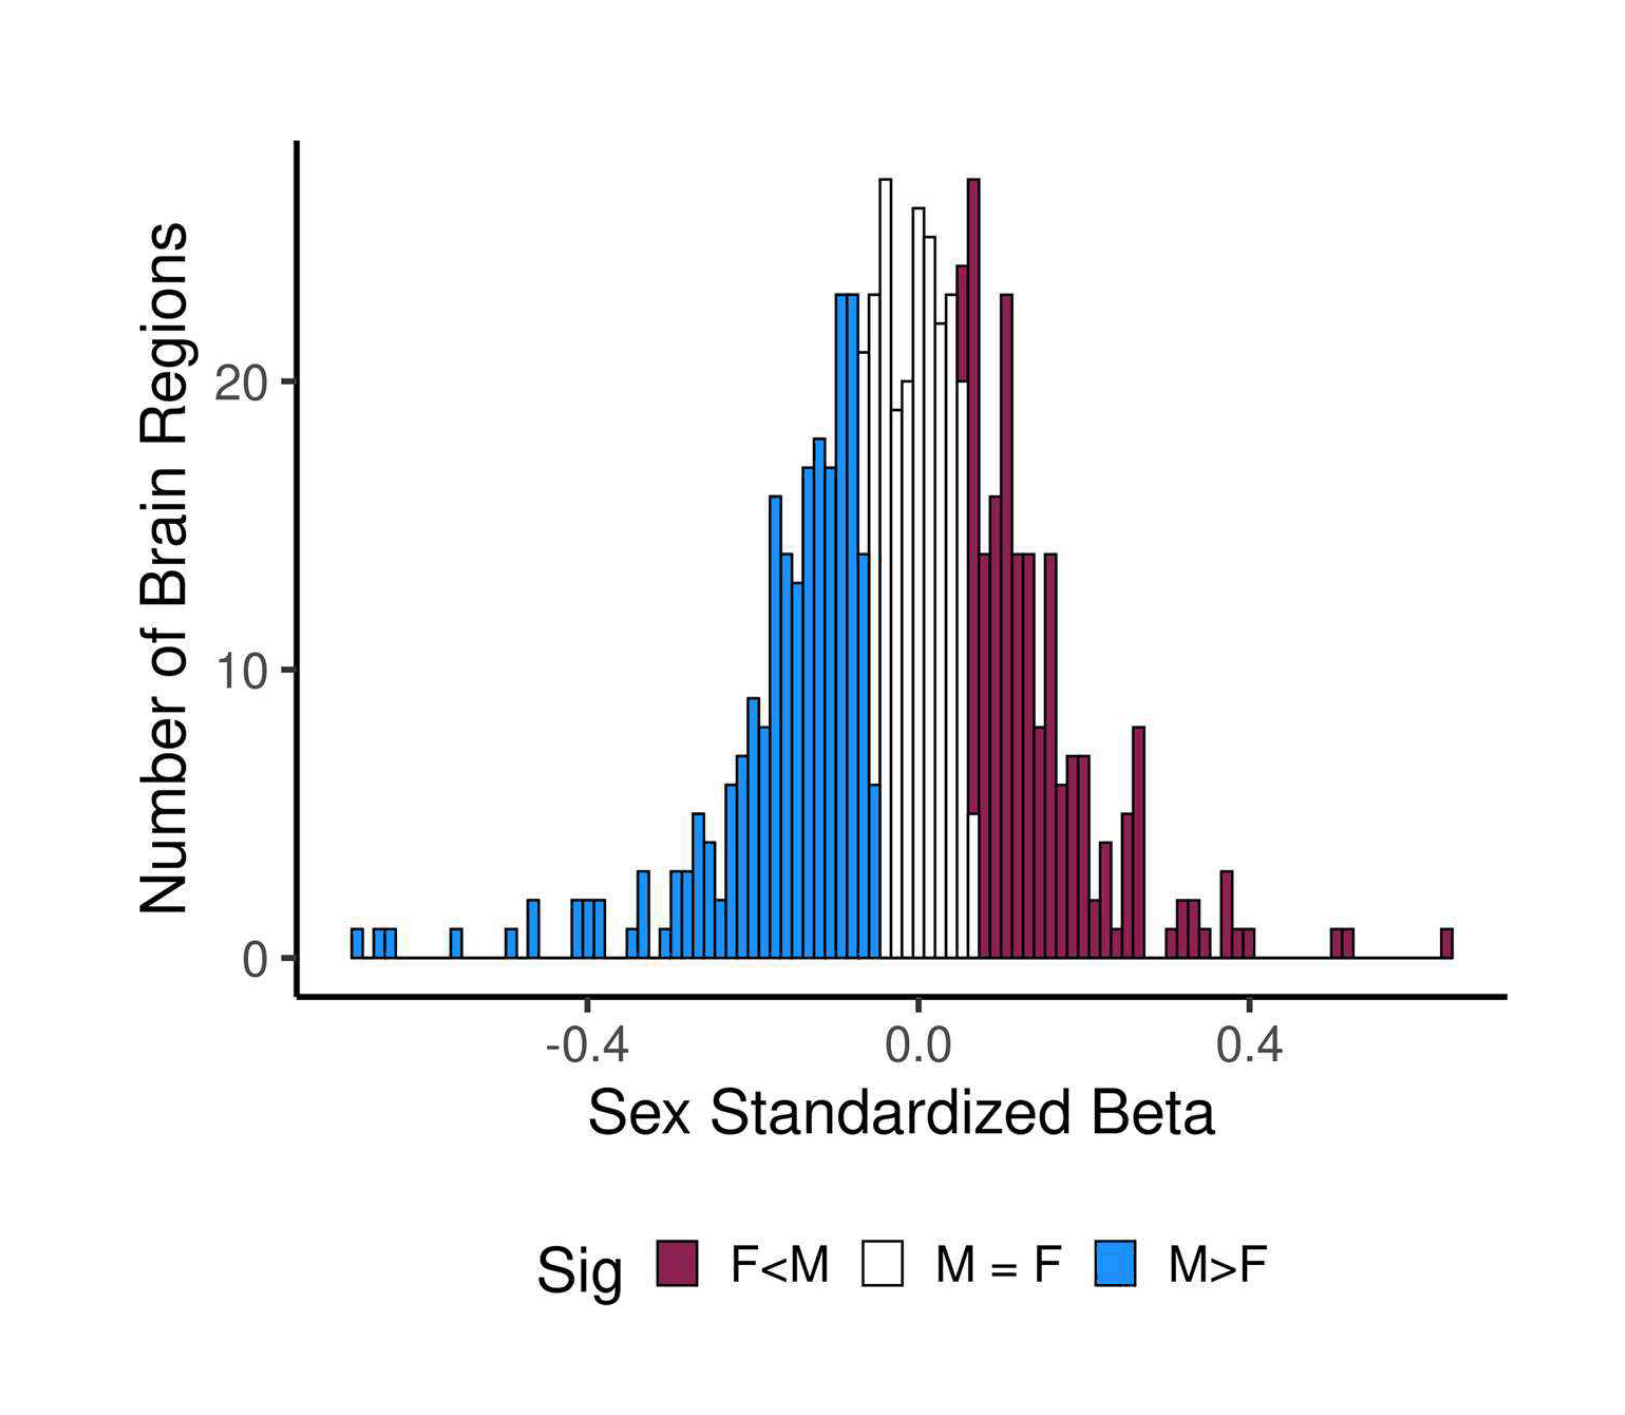 Figure 2: Distribution of the residual effect-size of sex differences across 620 regional brain measures, in a statistical model where log10(regional brain measure) is regressed on log10(total cerebral measure), sex, age, age2, and their interactions, and scanner site. Blue bars reflect the number of regions with a statistically-significant sex difference where the region is larger in males than in females (p < 7.33×10−6). Red bars reflect the number of regions with a statistically-significant sex difference where the region is larger in females than in males. White bars reflect non-significant differences. Results from Williams et al 2021a.